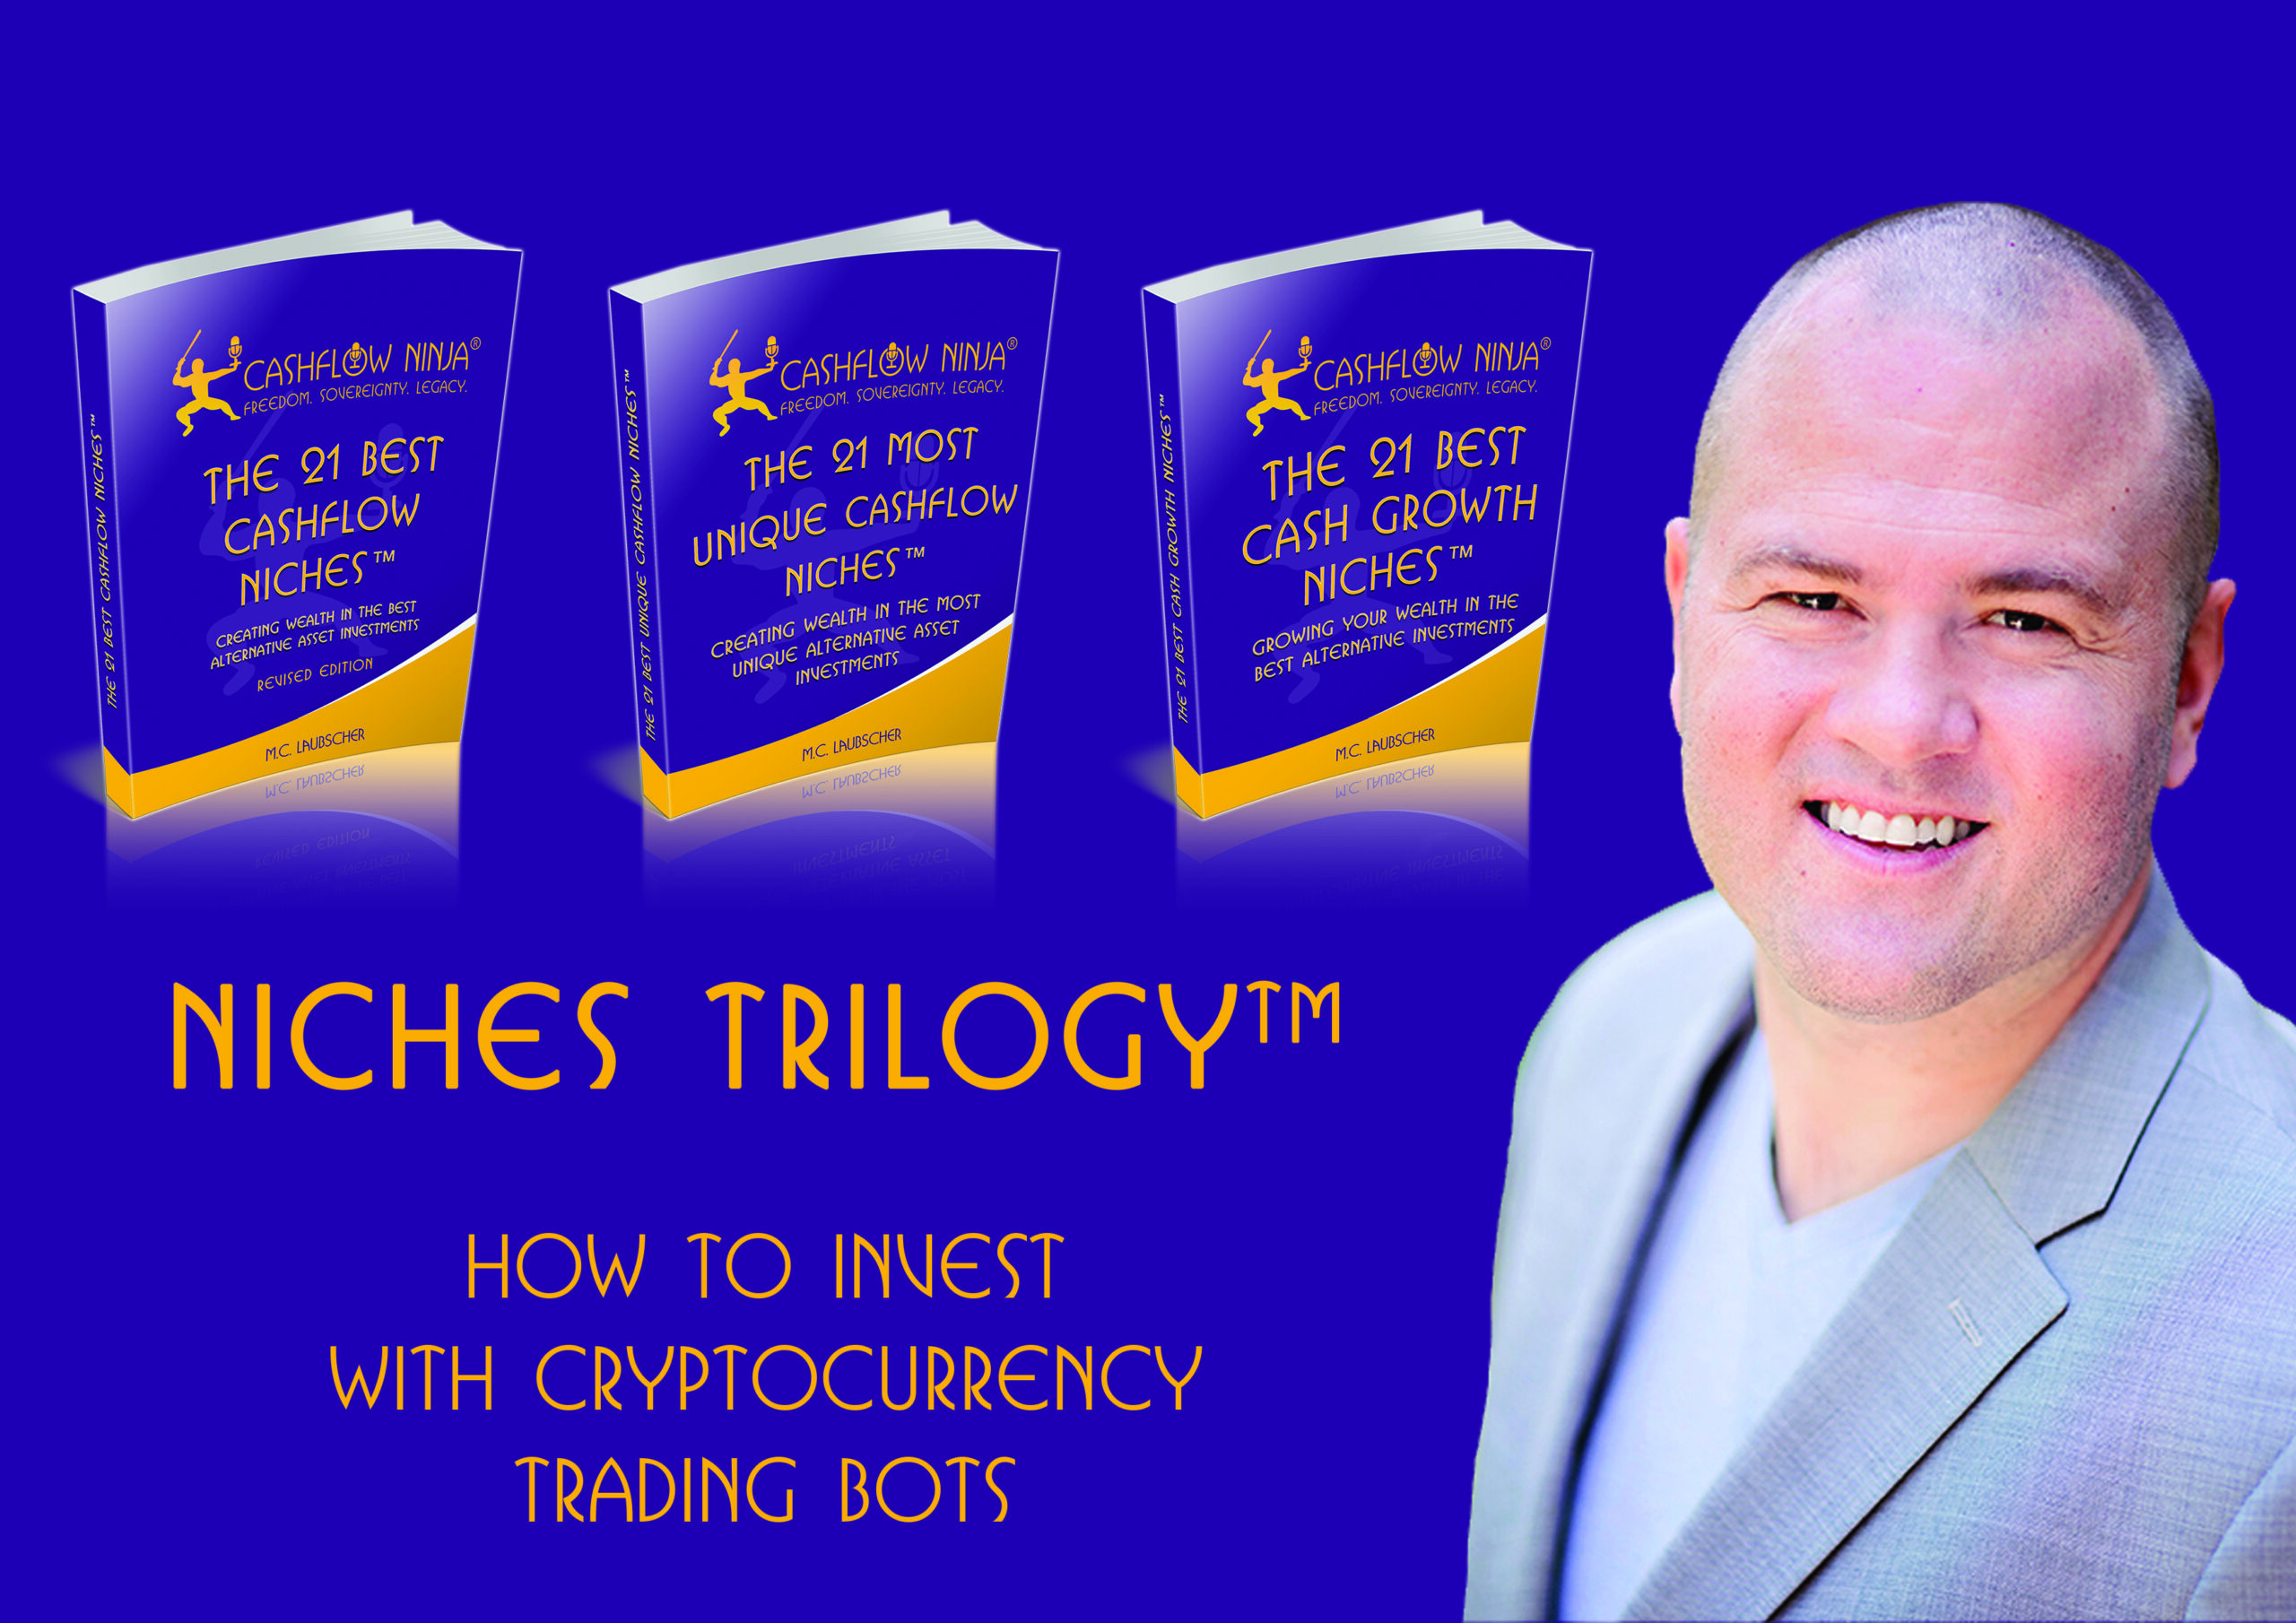 How To Invest With Cryptocurrency Trading Bots